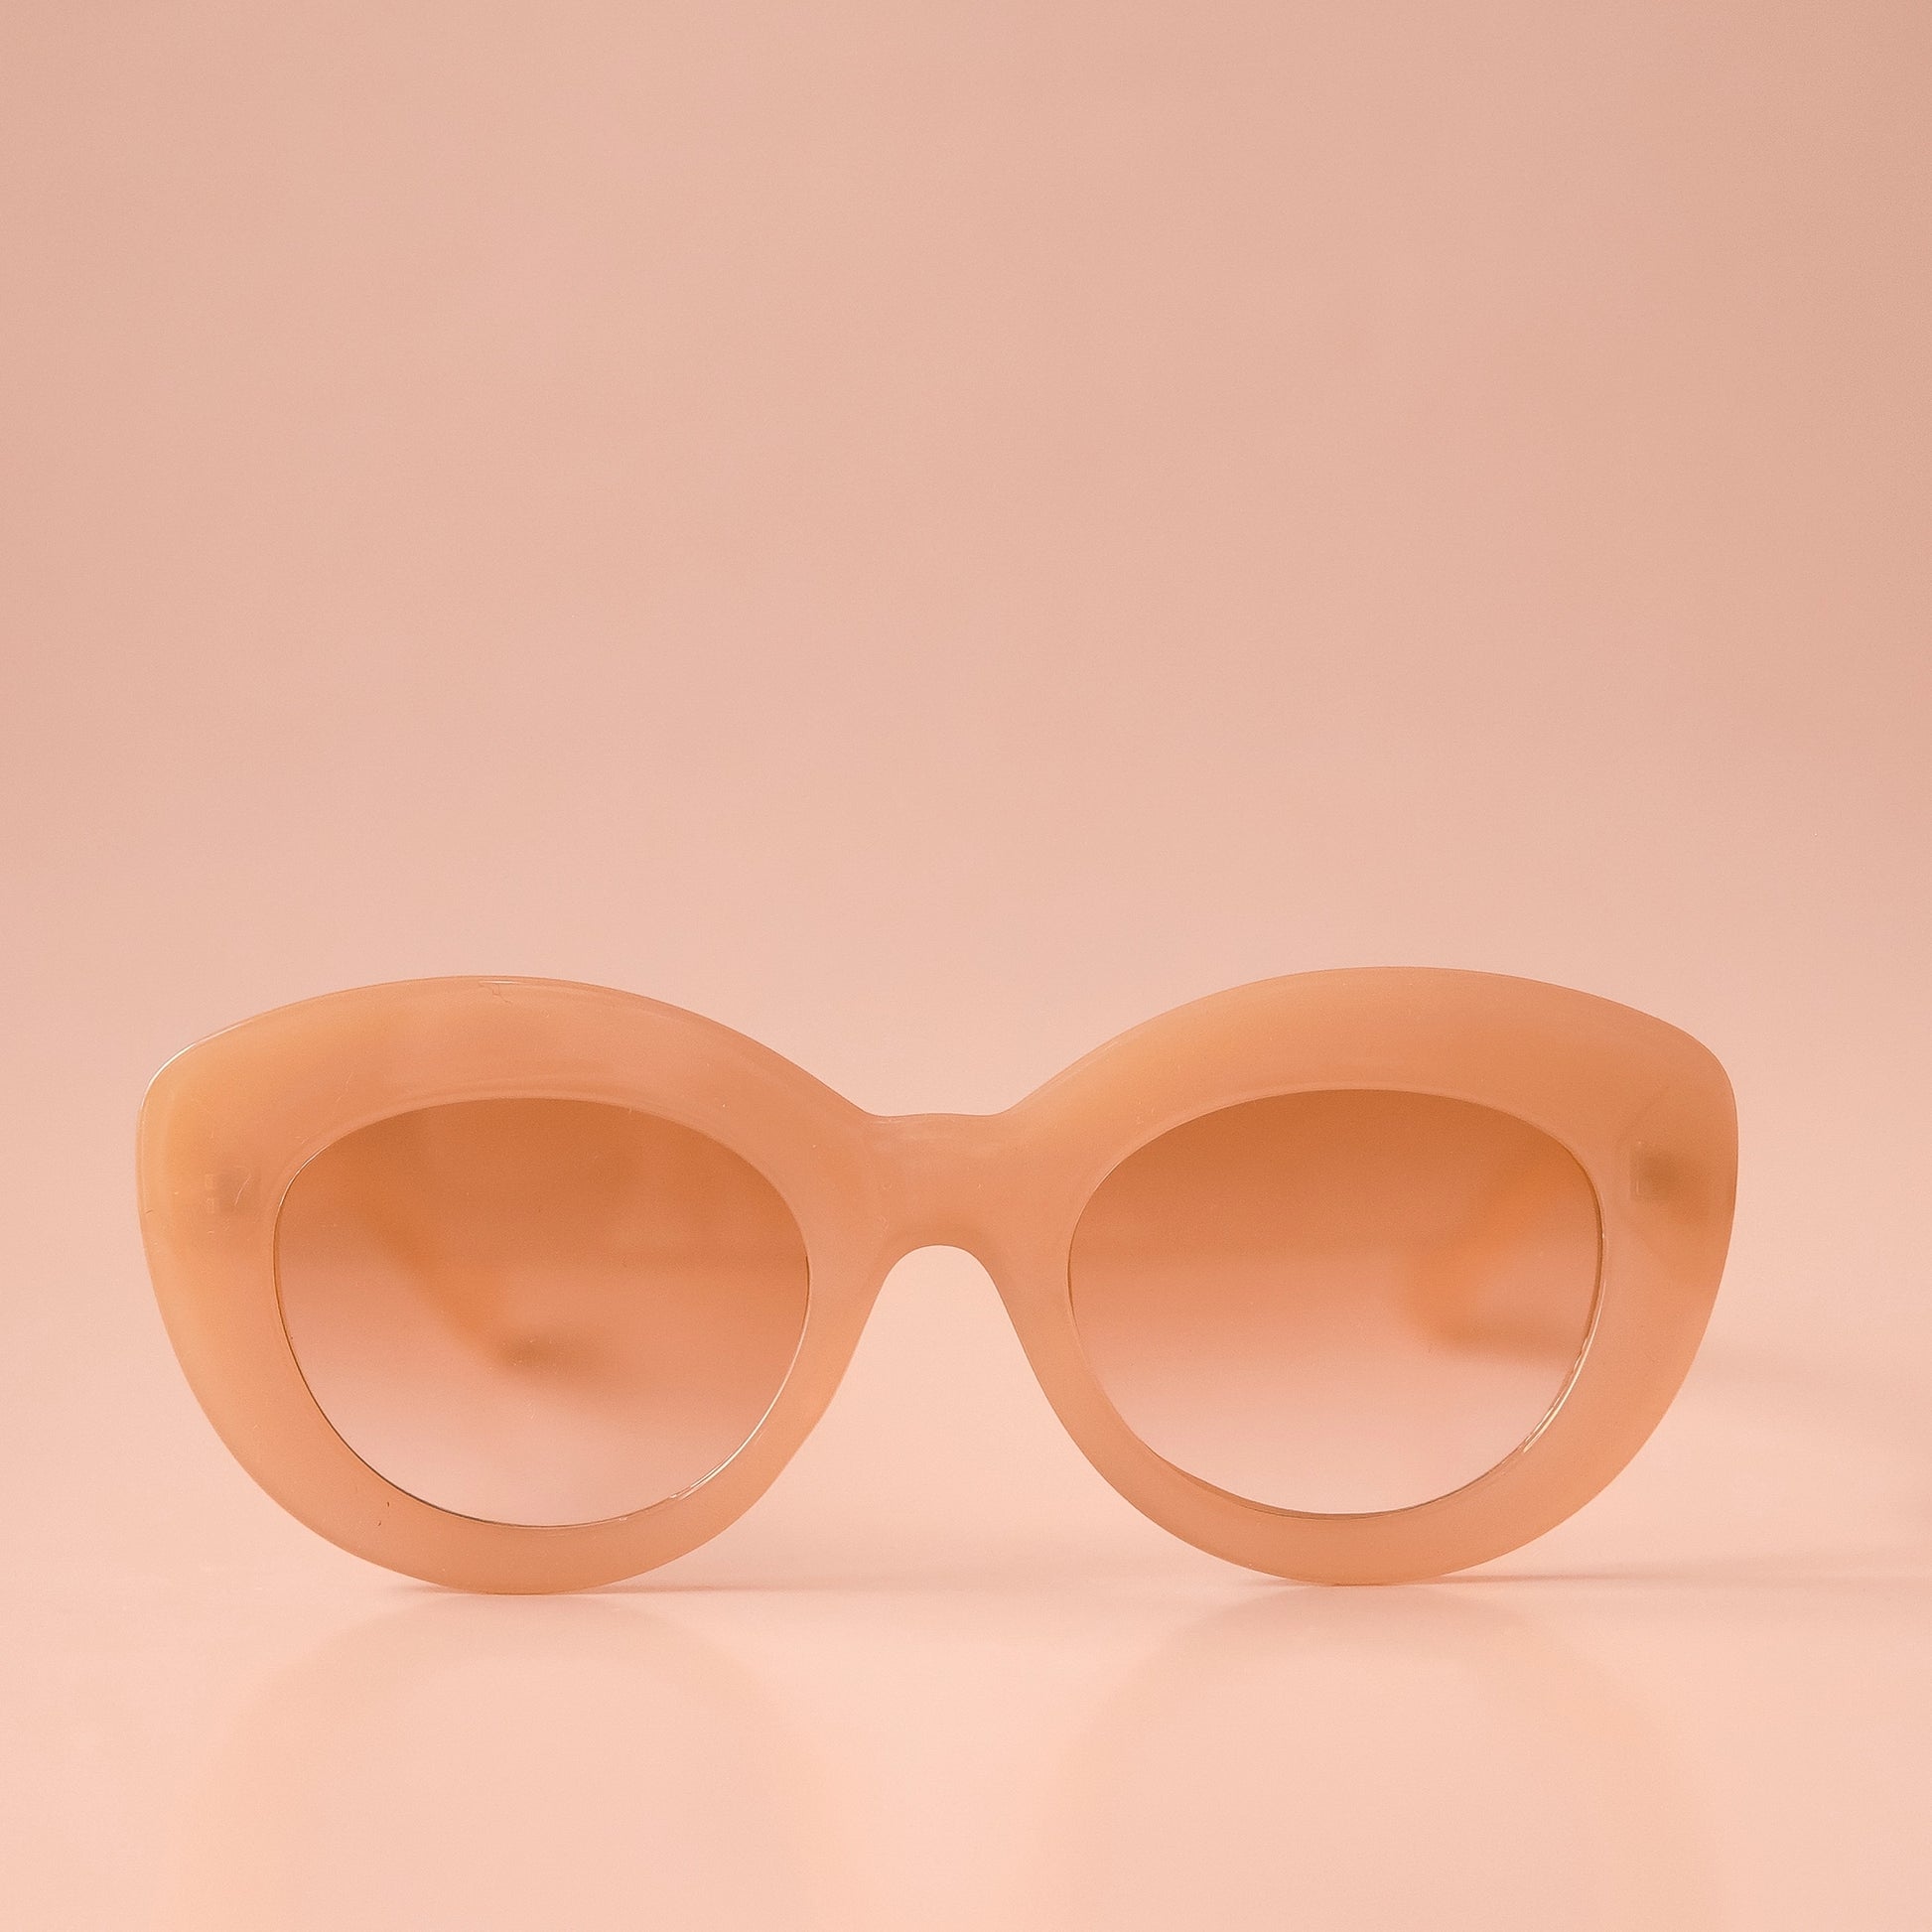 On a peachy background is the Gemma Sunglasses in the shade Amber. They have a rounded shape with a slight cateye flair at the corners. The frame material is a durable amber / peachy colored plastic and the lenses are a similar tone.